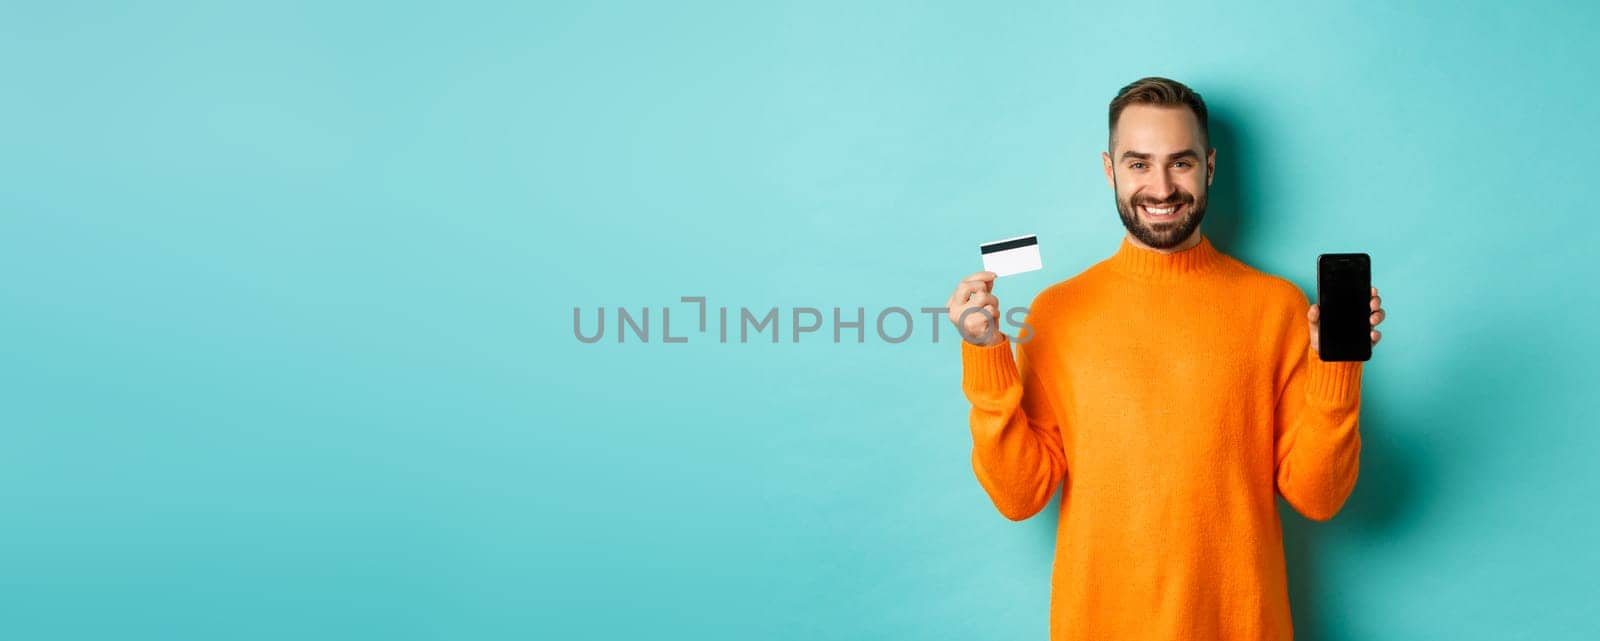 Online shopping. Happy attractive guy showing mobile phone screen and credit card, smiling satisfied, standing over light blue background.